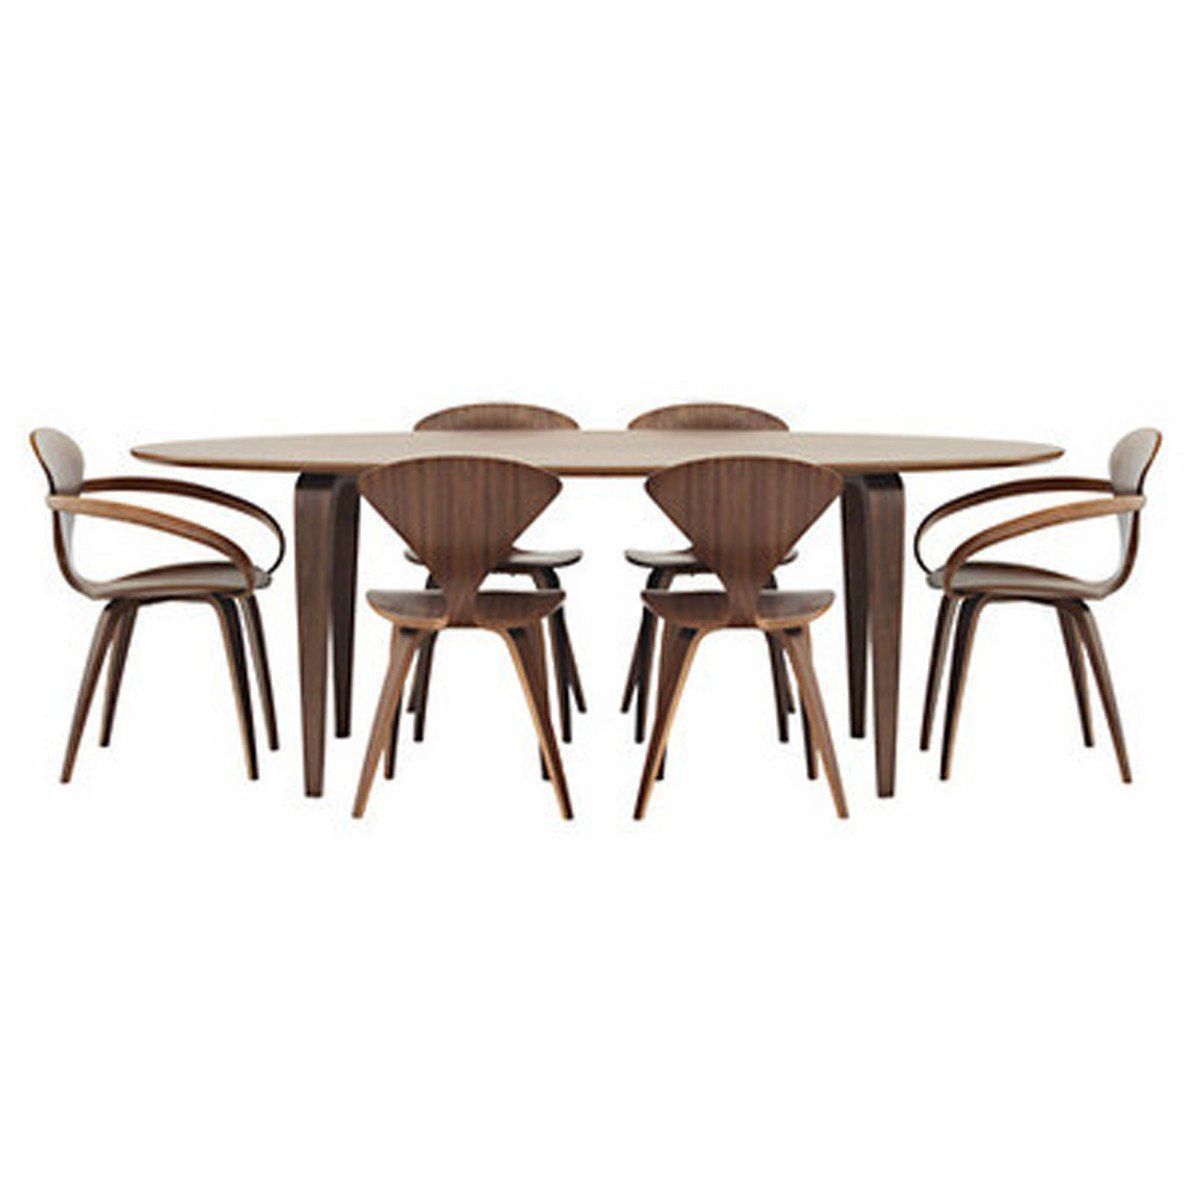 View All Cherner Products